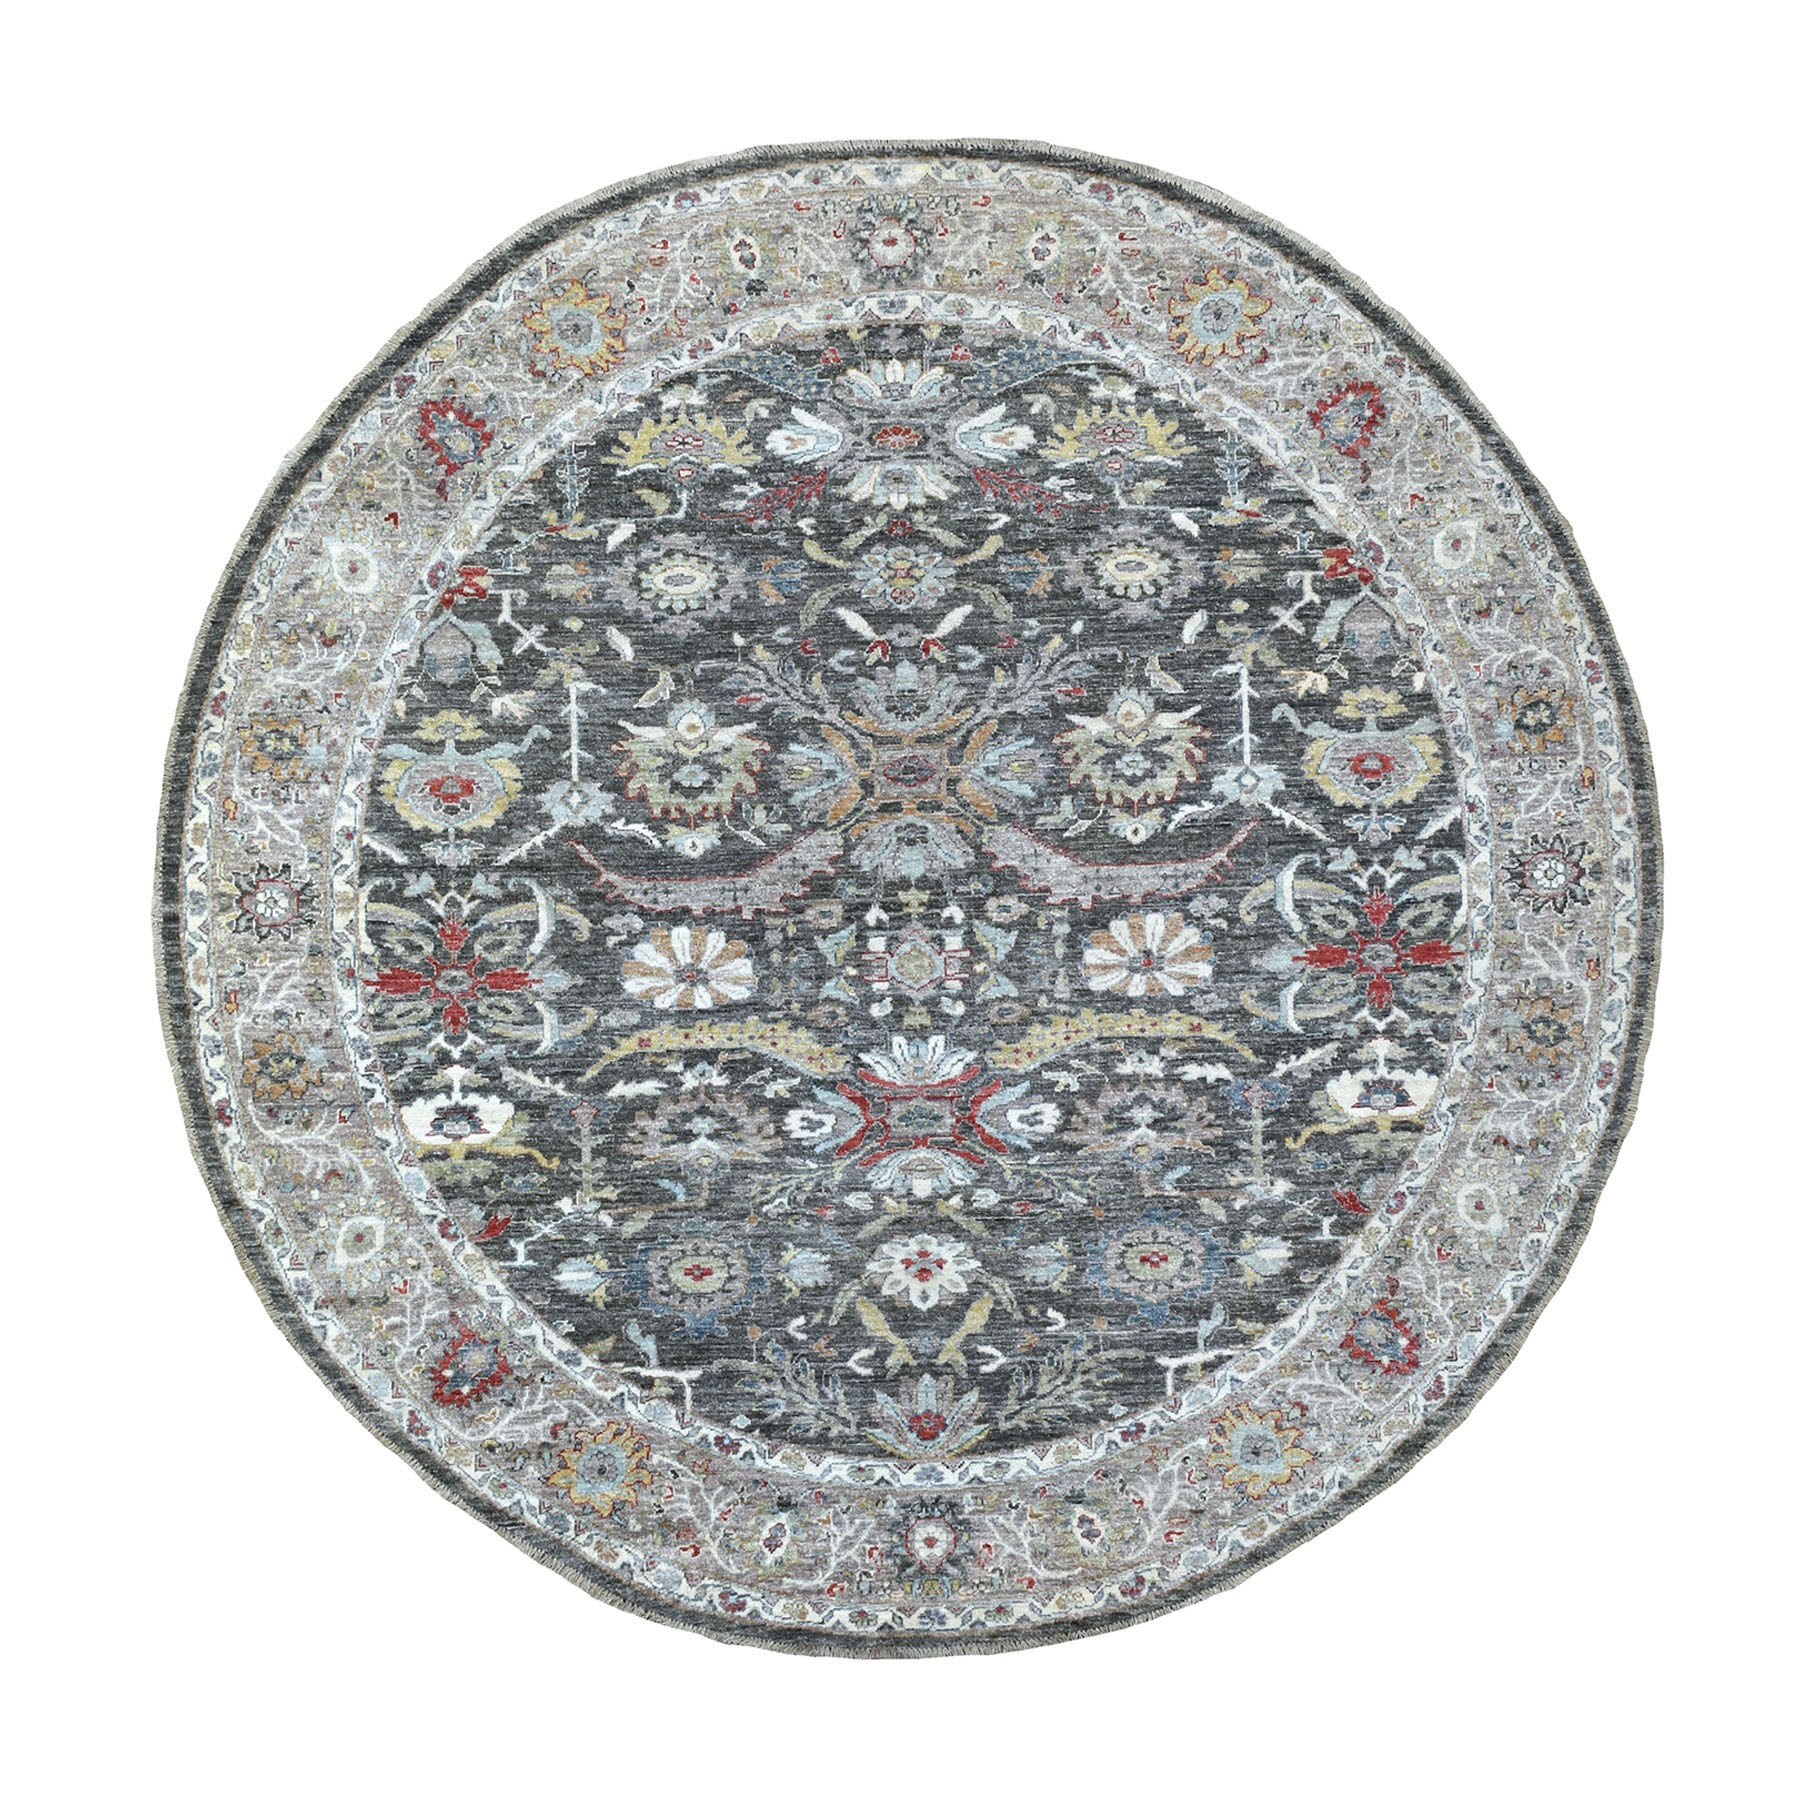 7'10"x7'10" Charcoal Black Fine Peshawar in a Colorful Palette Hand Woven Soft Pure Wool Oriental Round Rug 